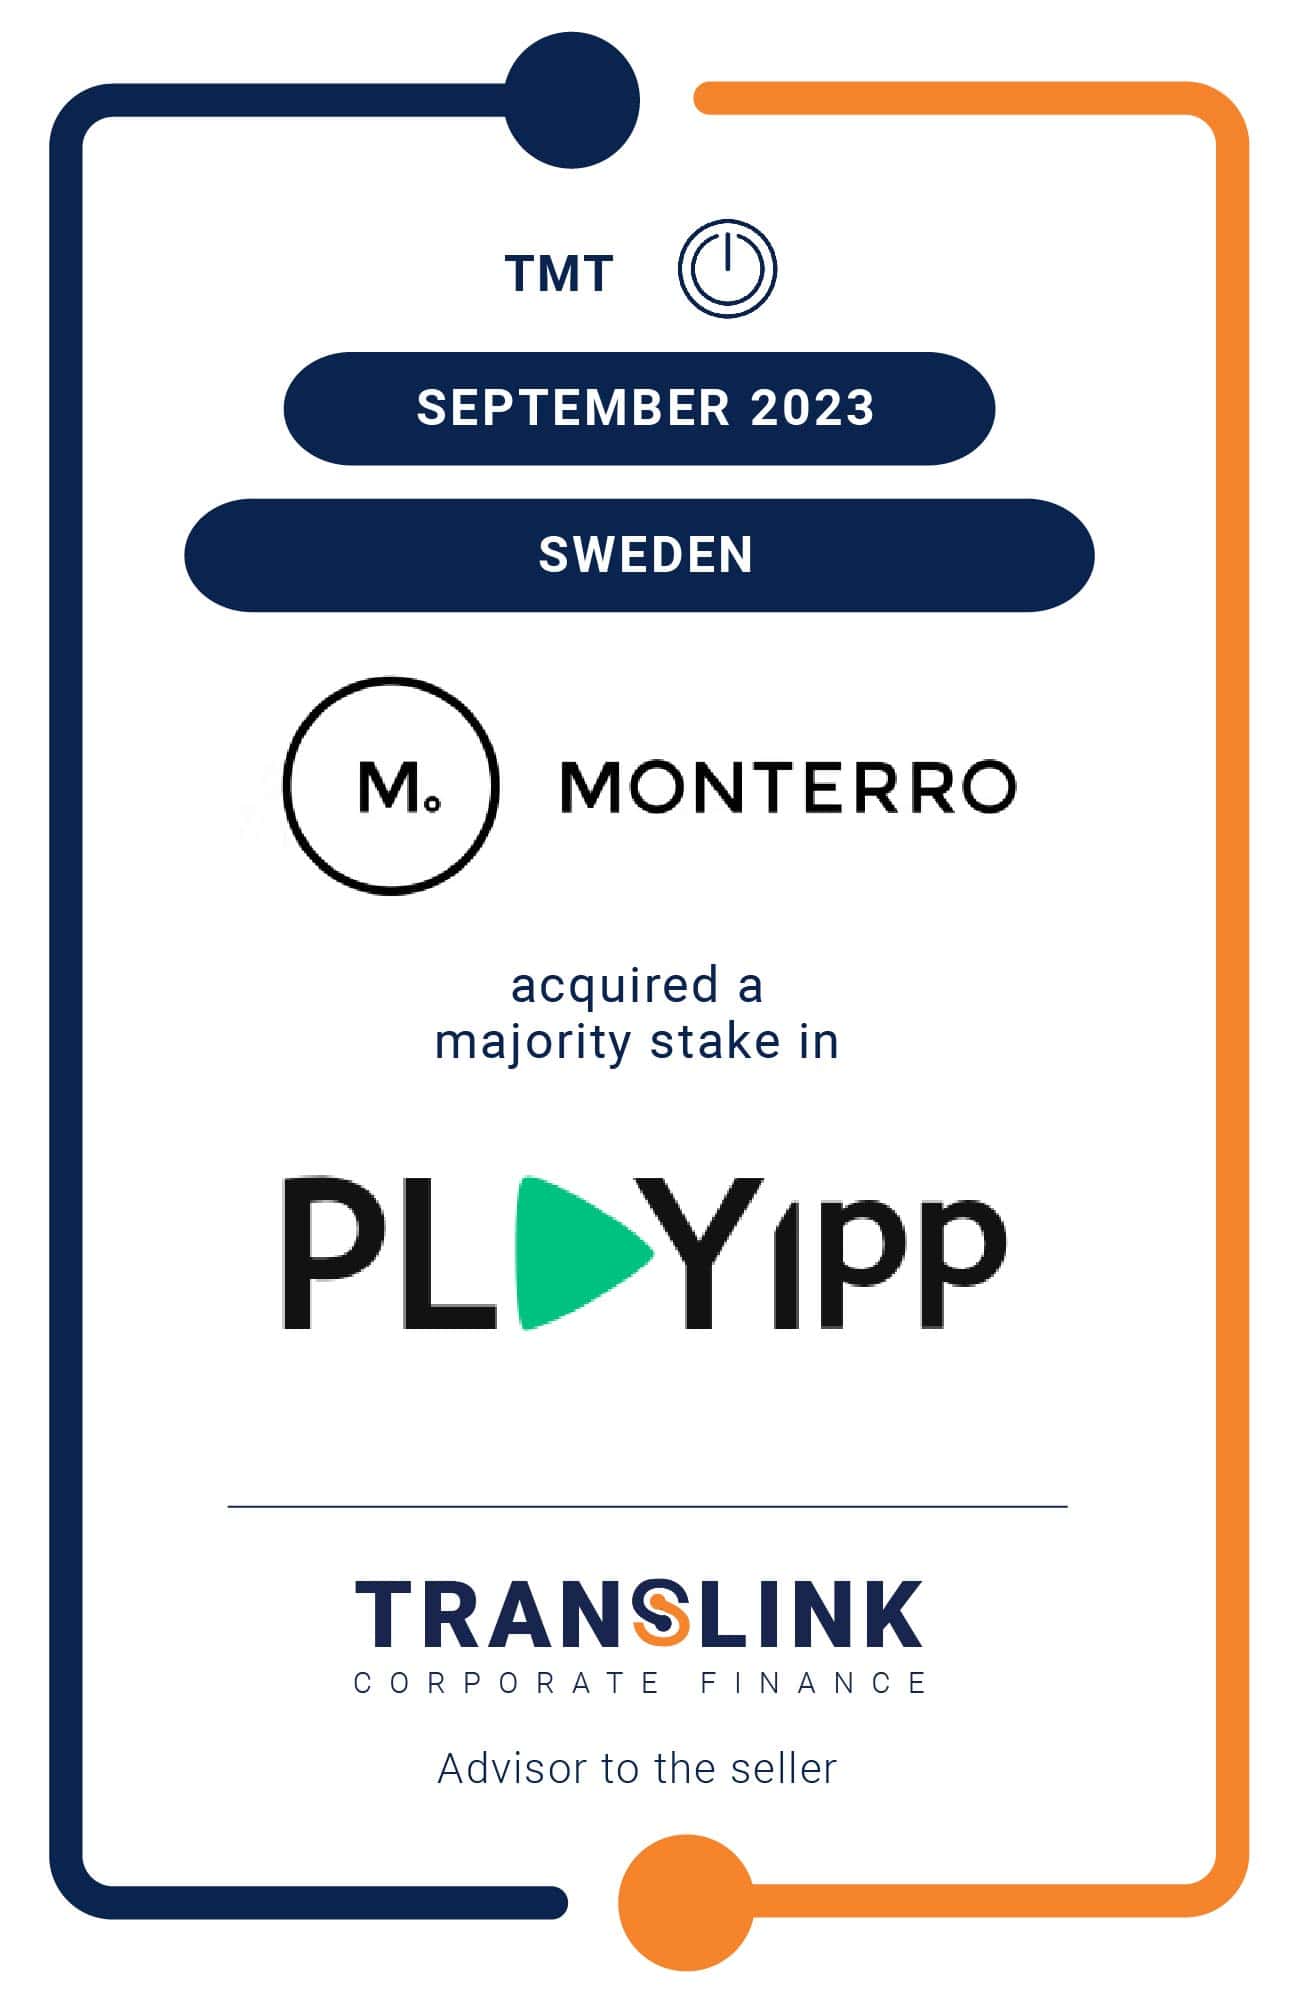 Translink Corporate Finance Acted As The Financial And Strategic Advisor To PLAYipp On Its Sale To Monterro